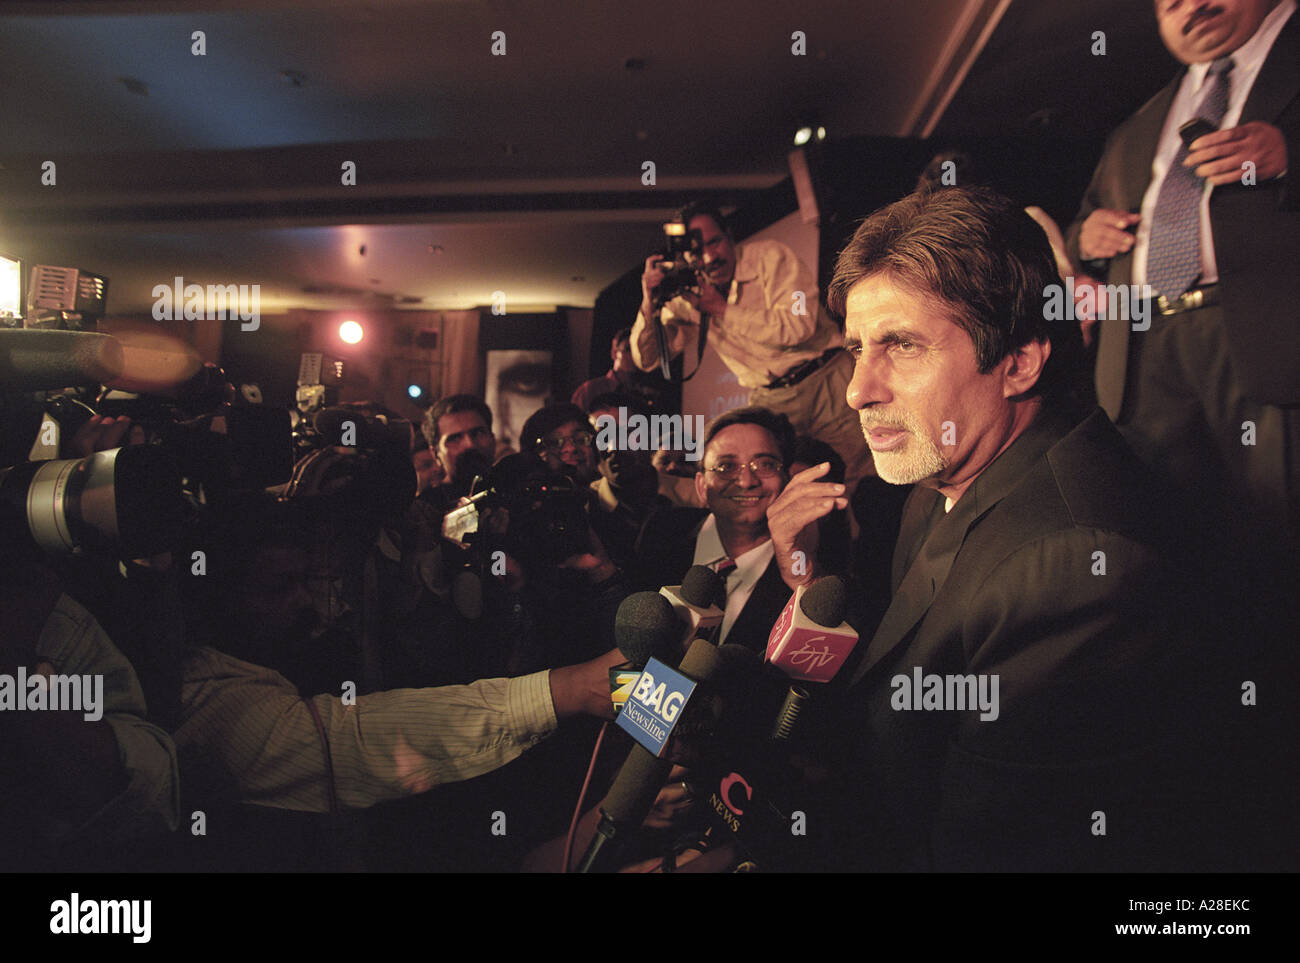 Amitabh Bachchan, Indian Bollywood hindi movie film star actor, at the launch of AB perfume, India Stock Photo